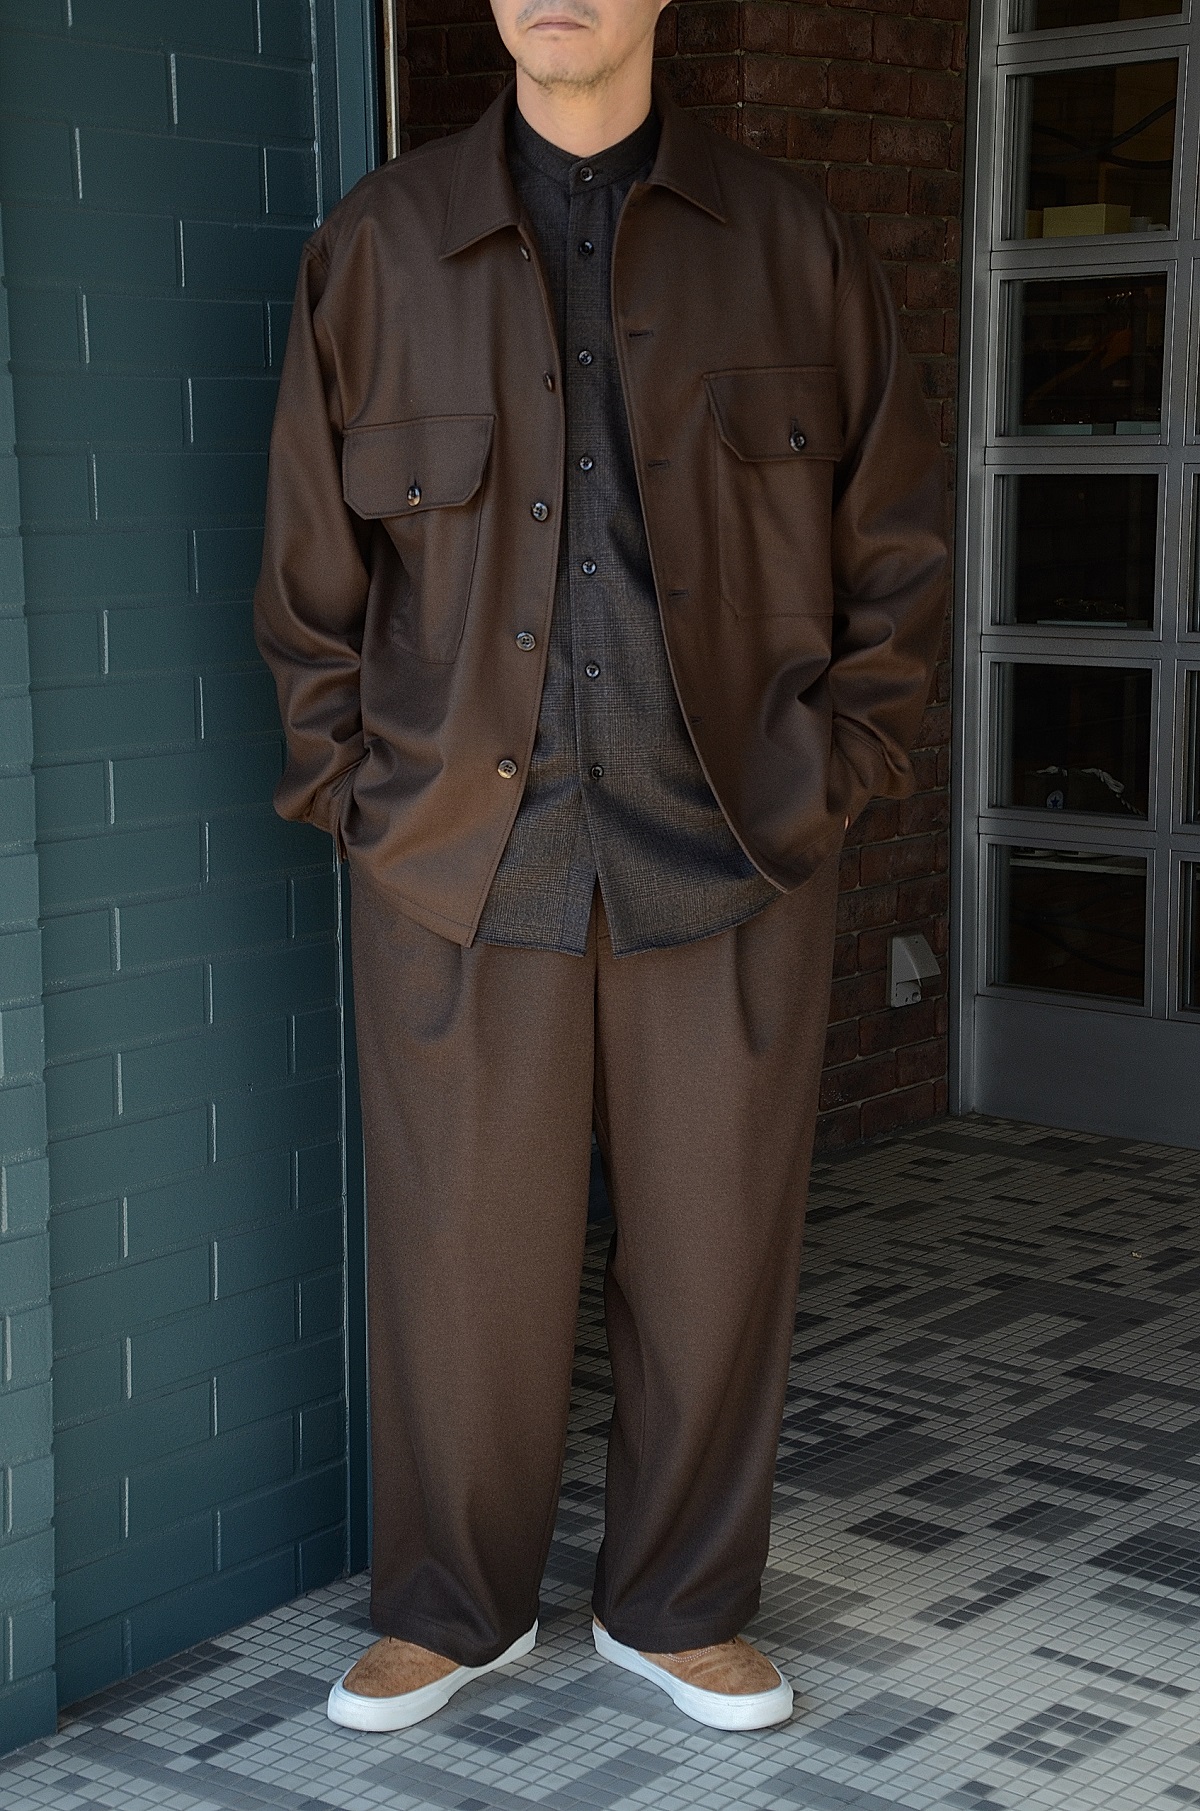 WEWILL ウィーウィル FATIGUE SHIRT Brown d